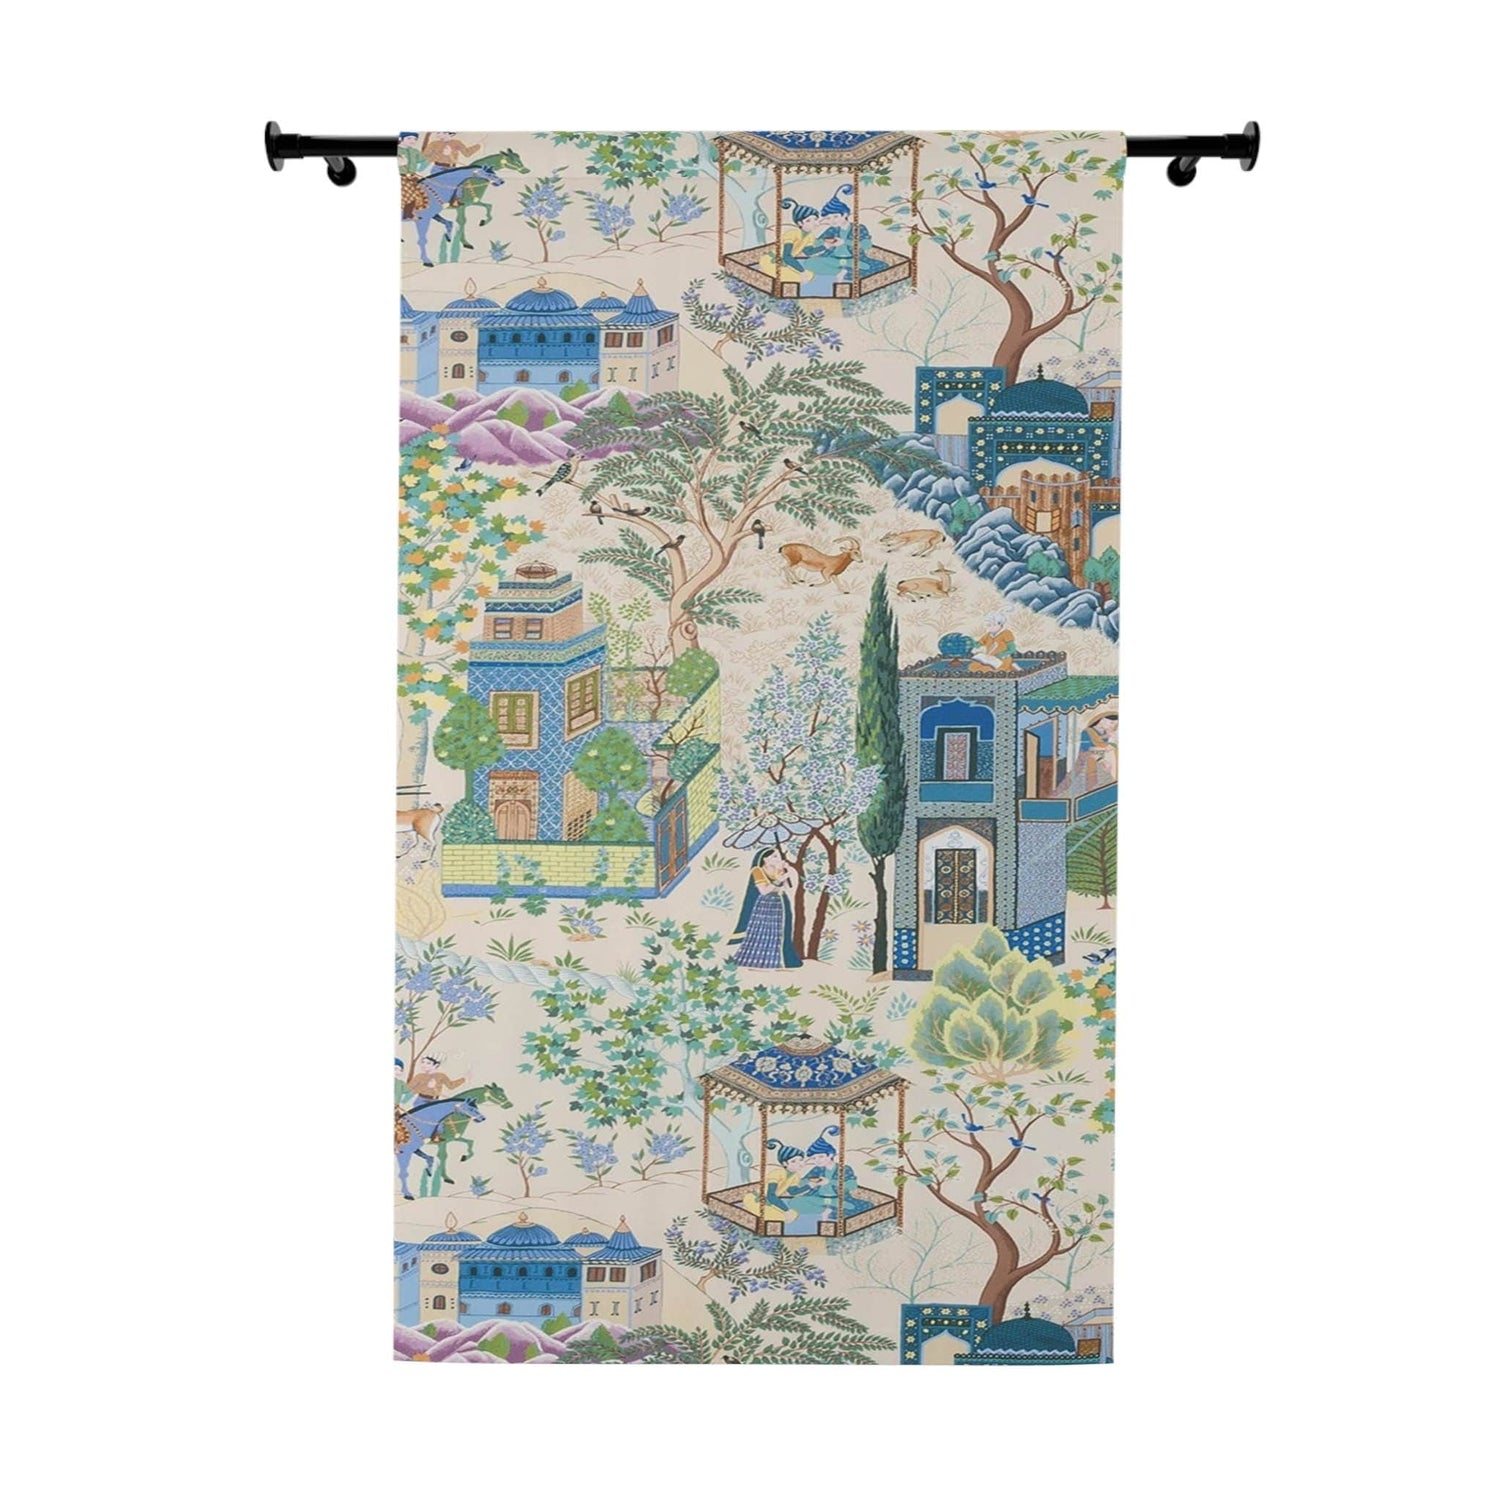 Vintage French Toile De Jouy Window Curtains, Blue, Green Floral Print, Traditional Asian Country Scene, Rustic Chic Window Coverings